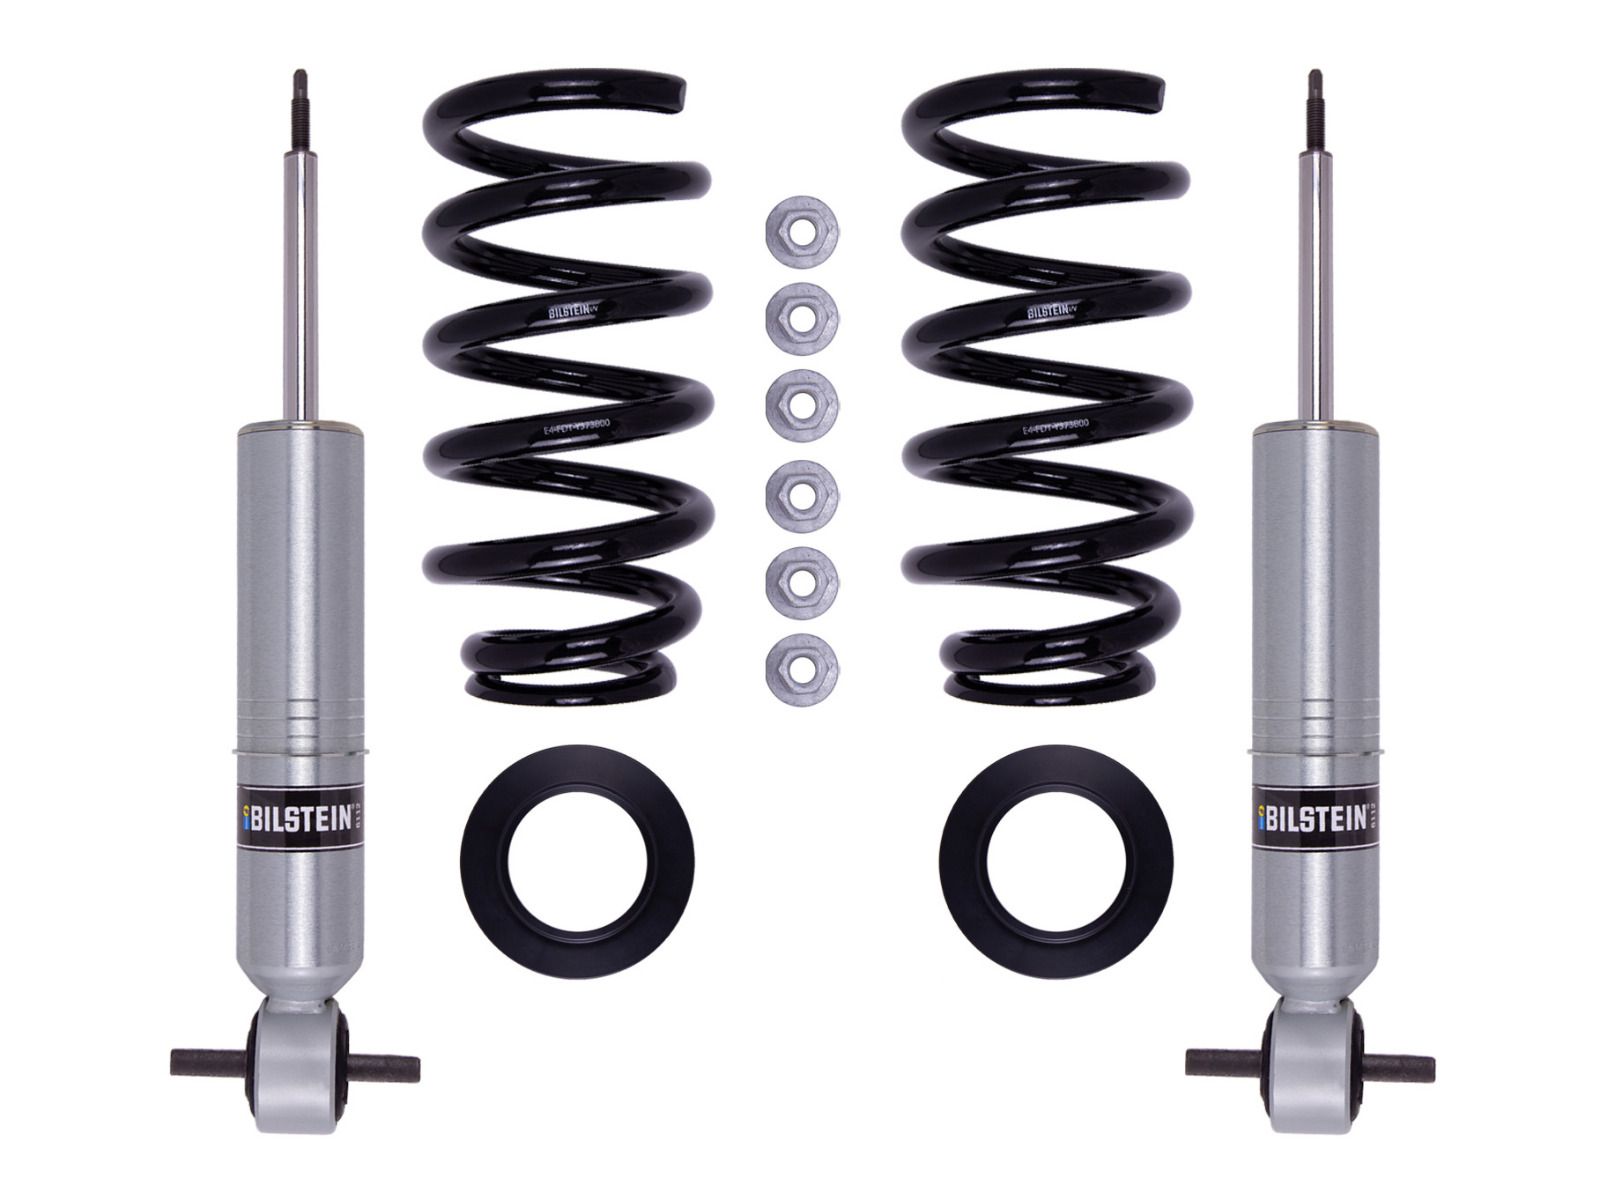 Silverado 1500 2007-2013 Chevy 4WD - Bilstein FRONT 6112 Series Coil-Over Kit (Adjustable Height 0"- 1.85" Front Lift)